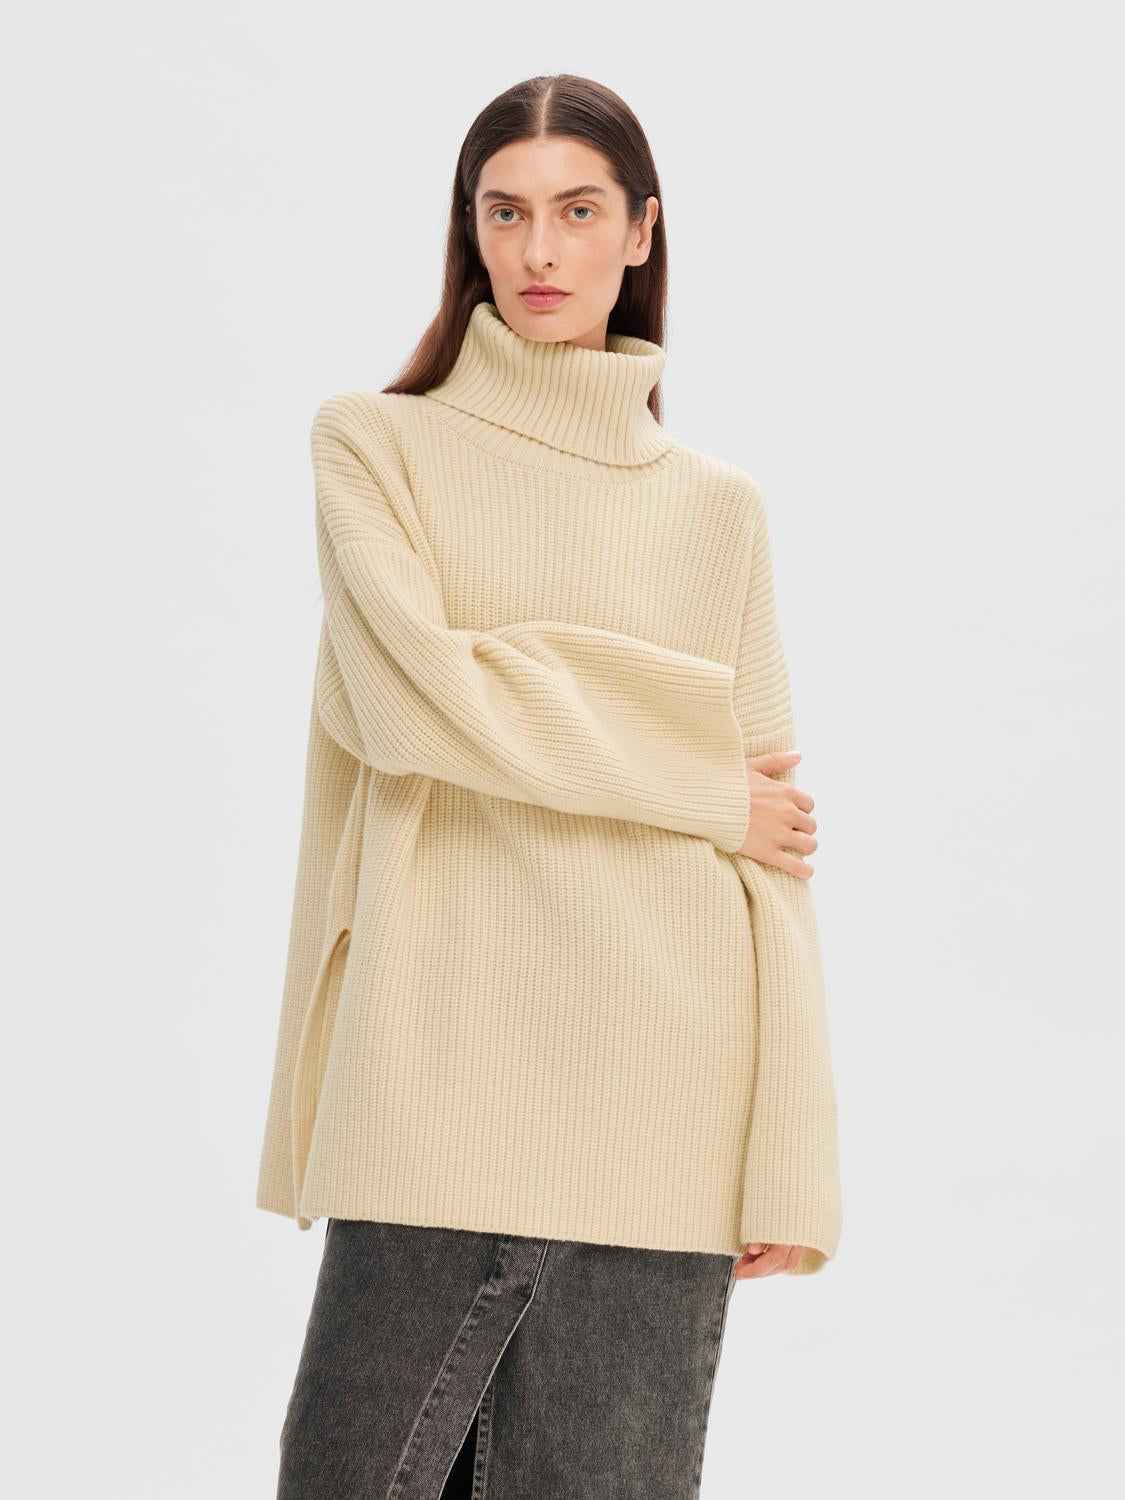 SELECTED FEMME - MARY Pullover - Birch